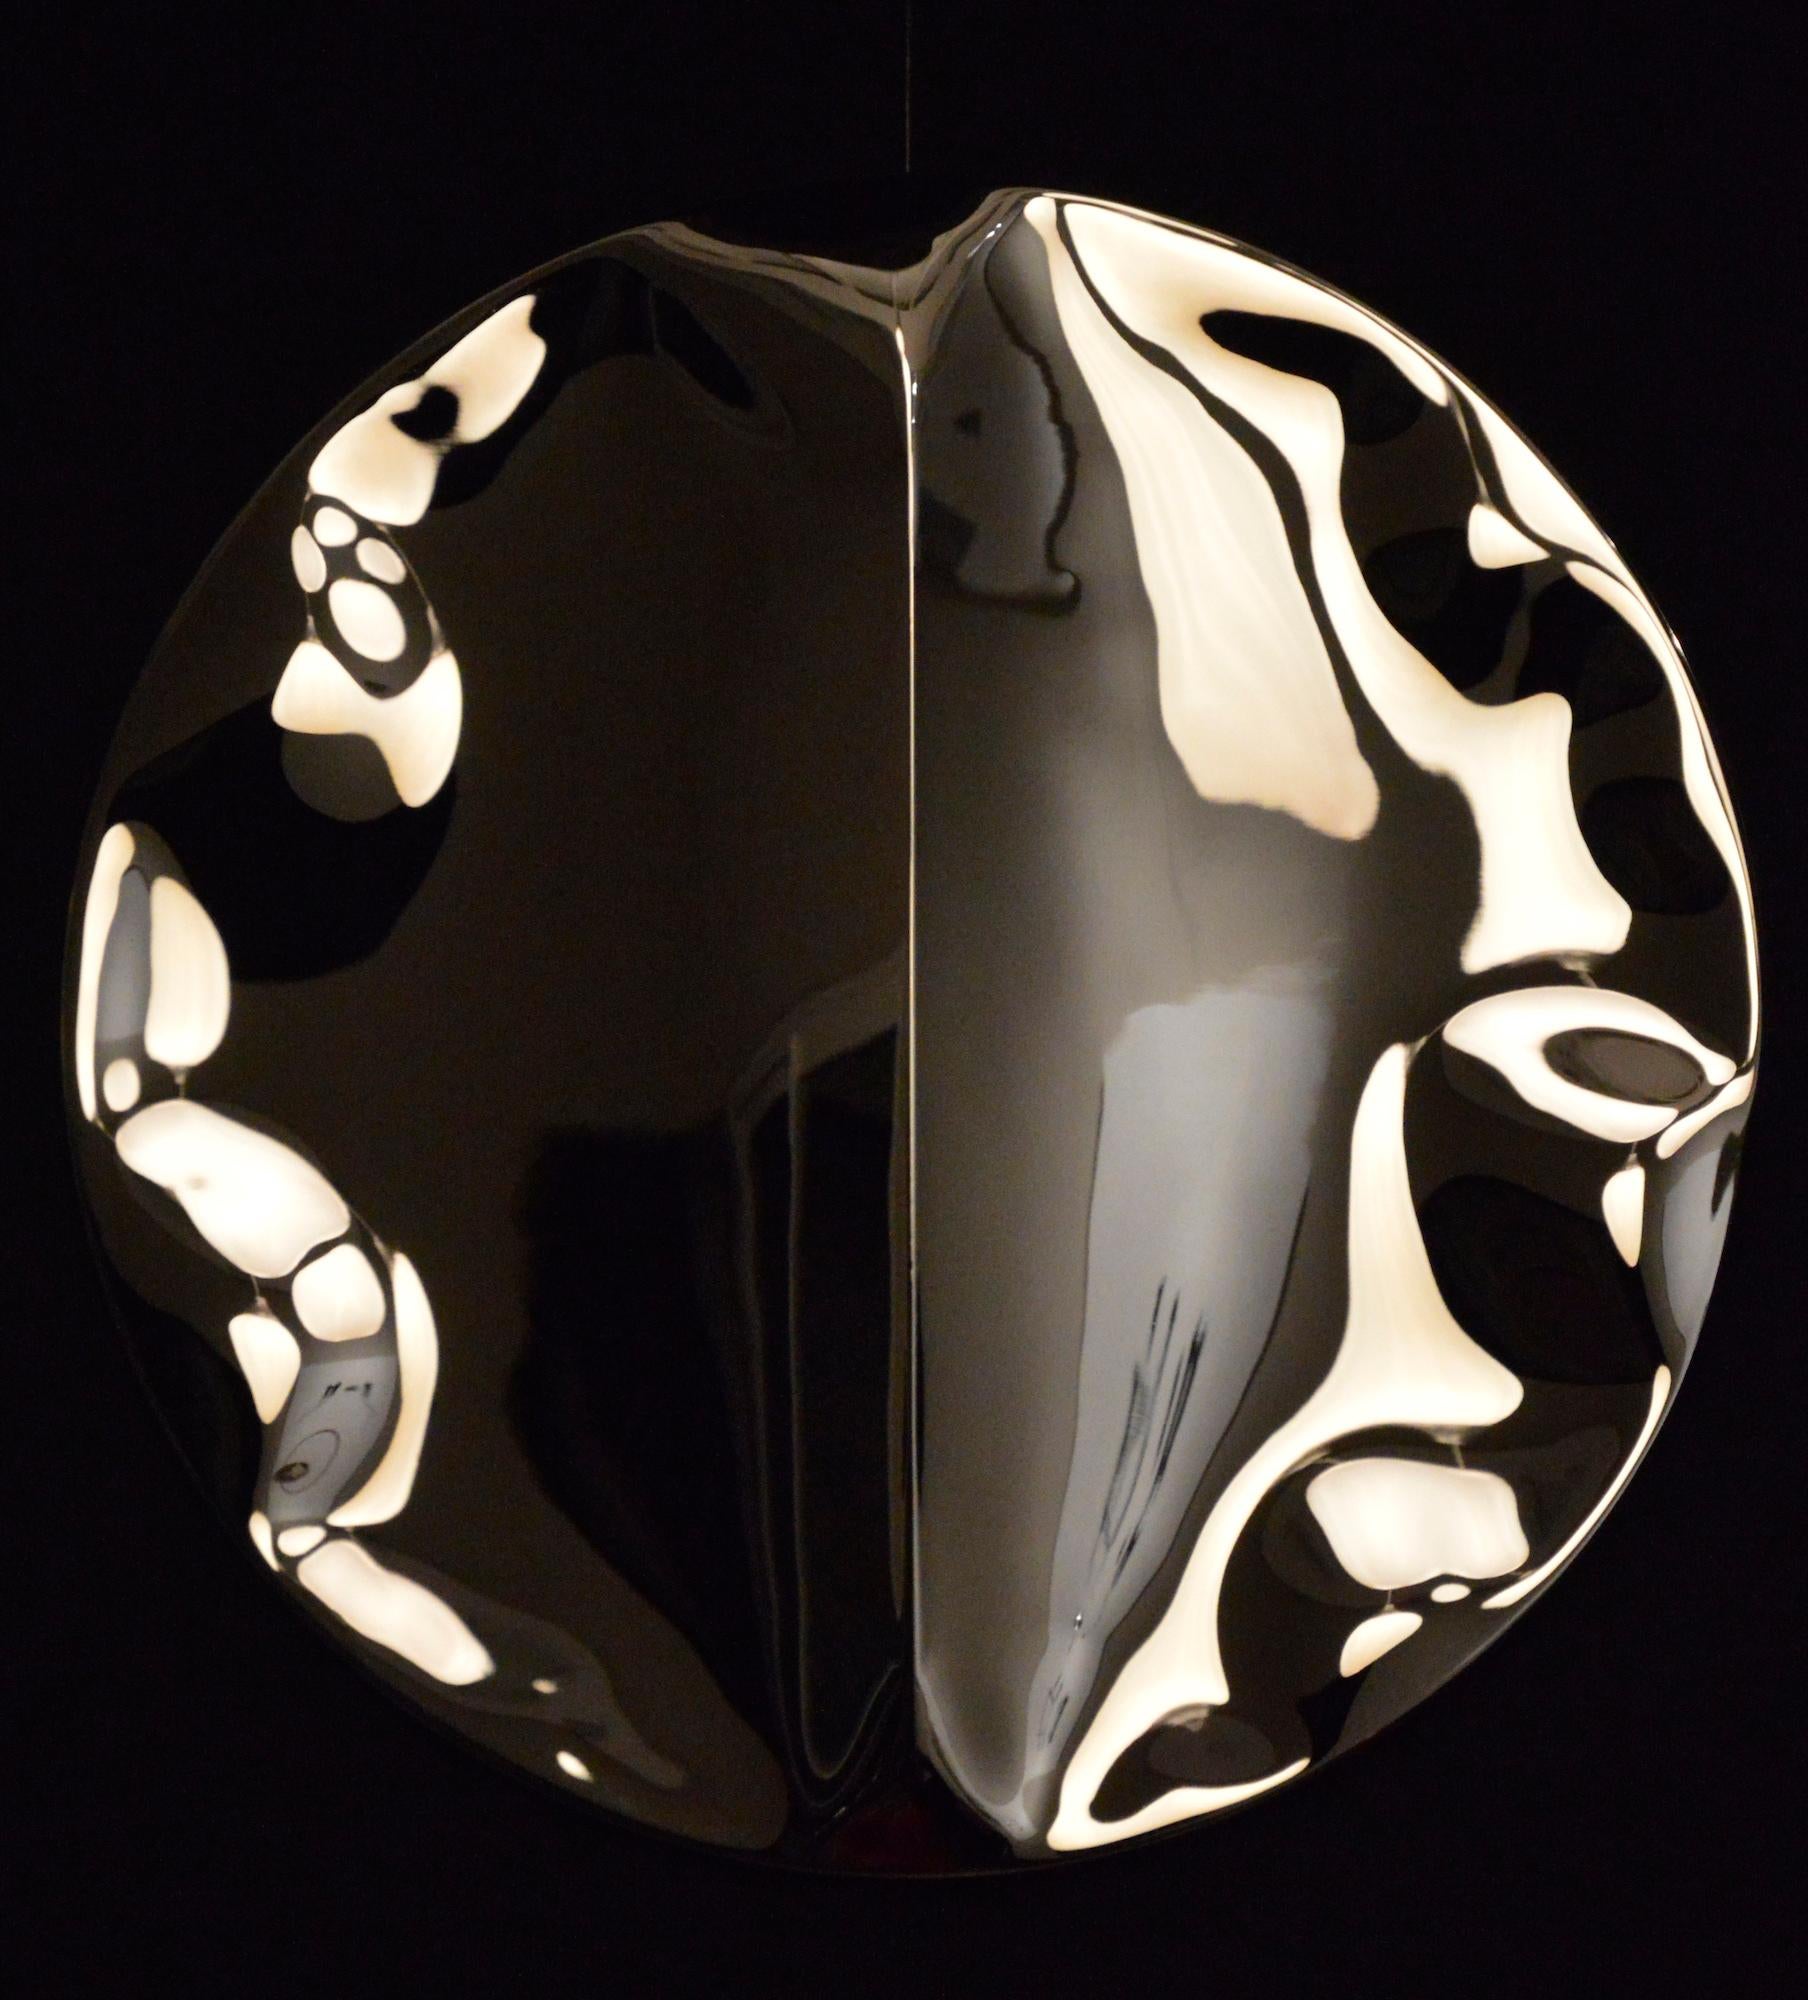 Wall mirror “with fold” I by Franck K - Stainless steel sculpture, reflection For Sale 2